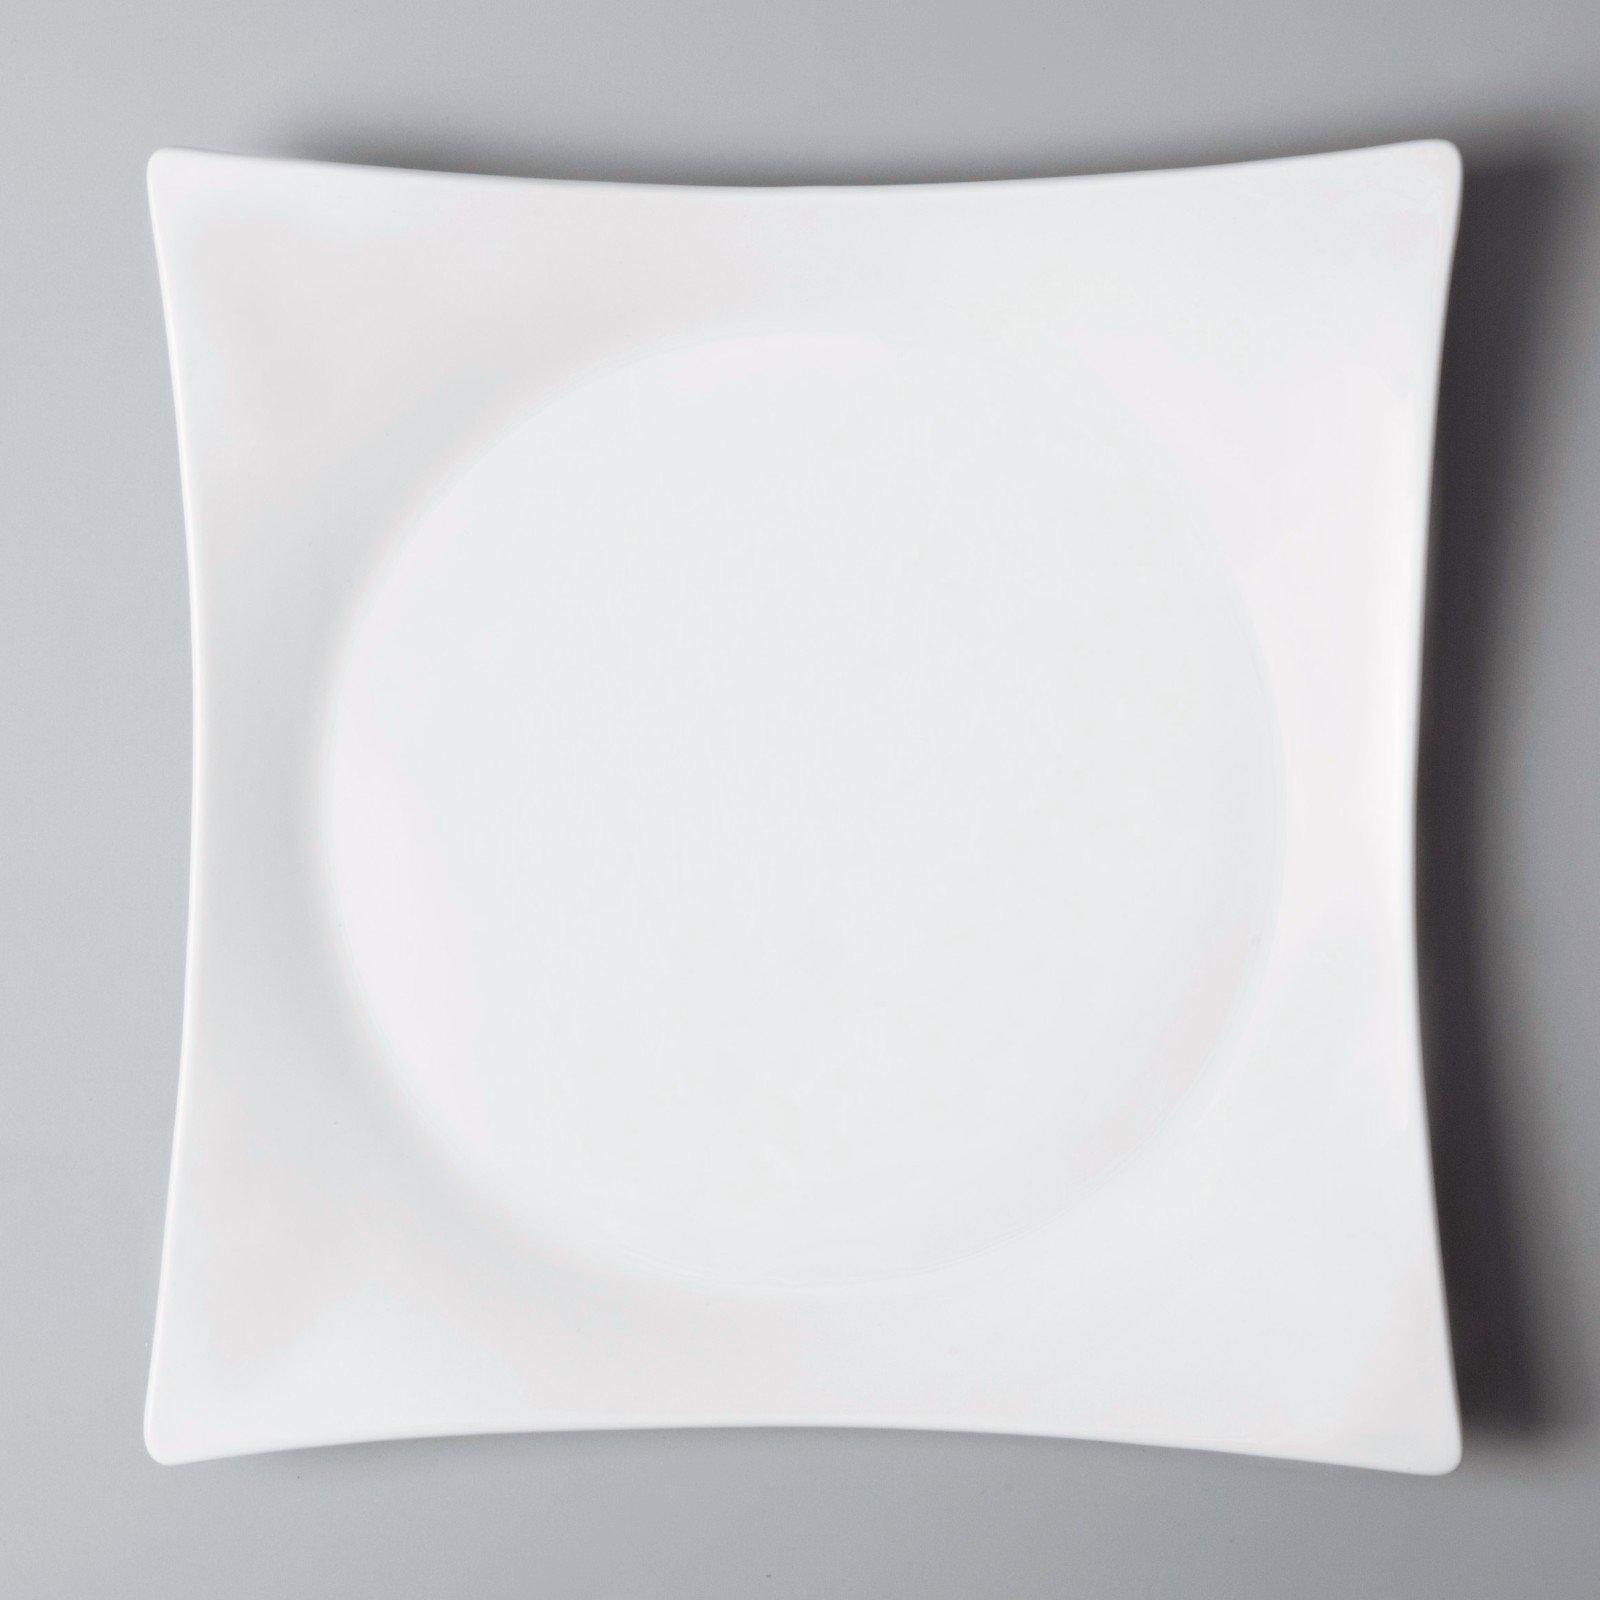 Two Eight contemporary cool restaurant plates directly sale for home-2